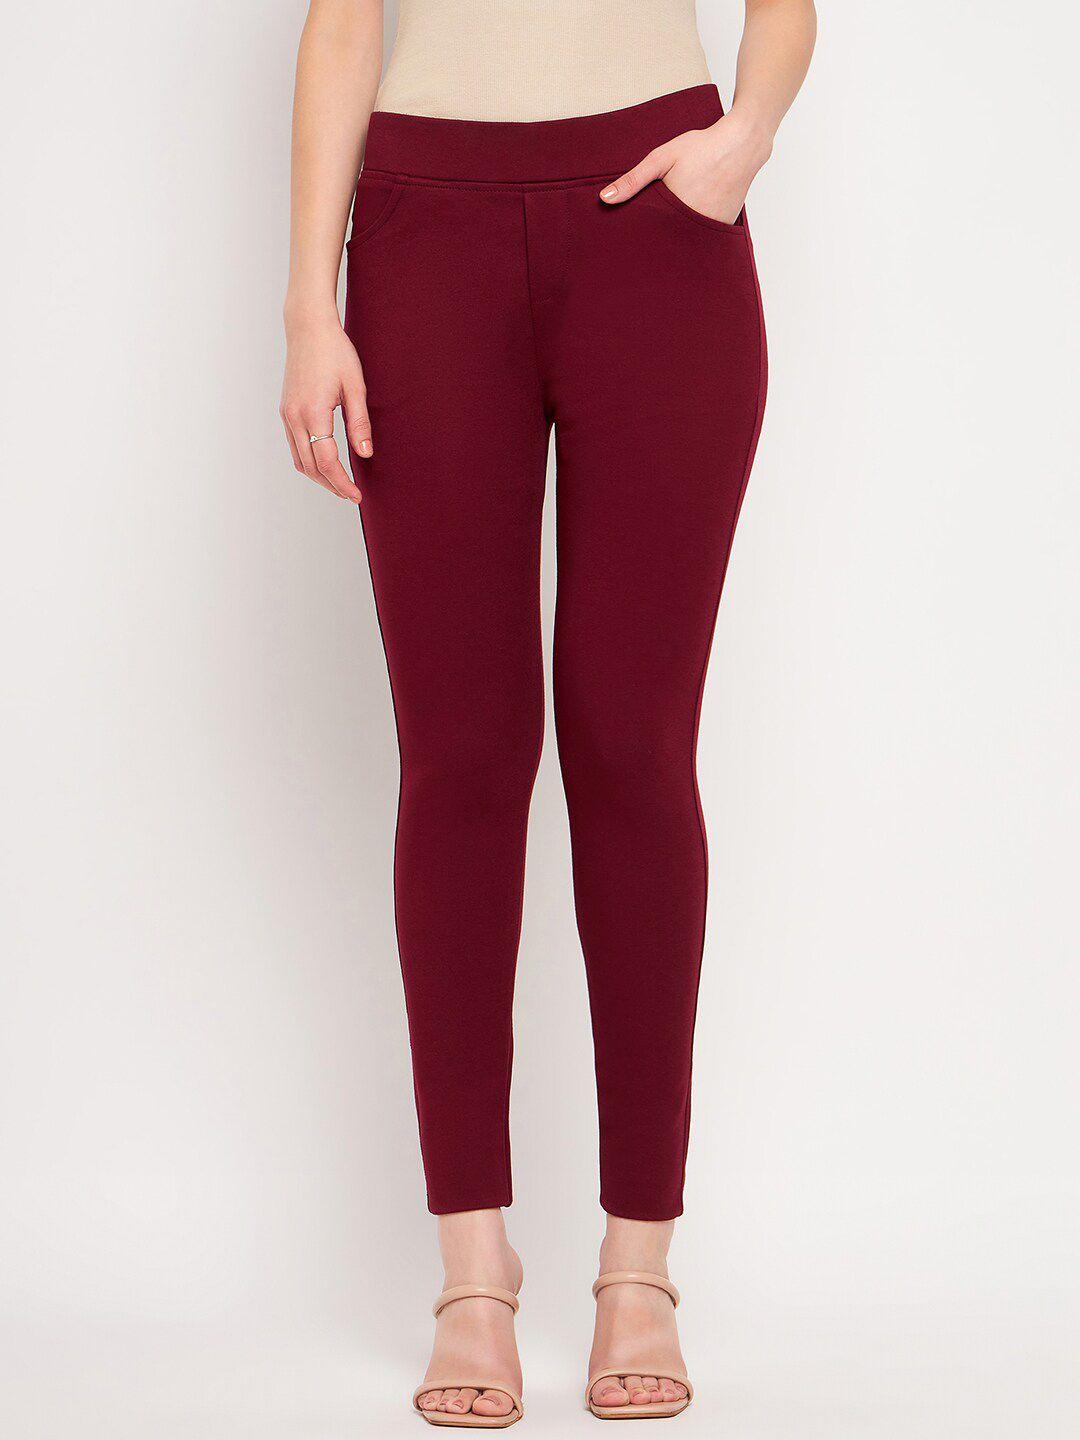 tulip-21-women-ankle-length-slim-fit-stretchable-jeggings